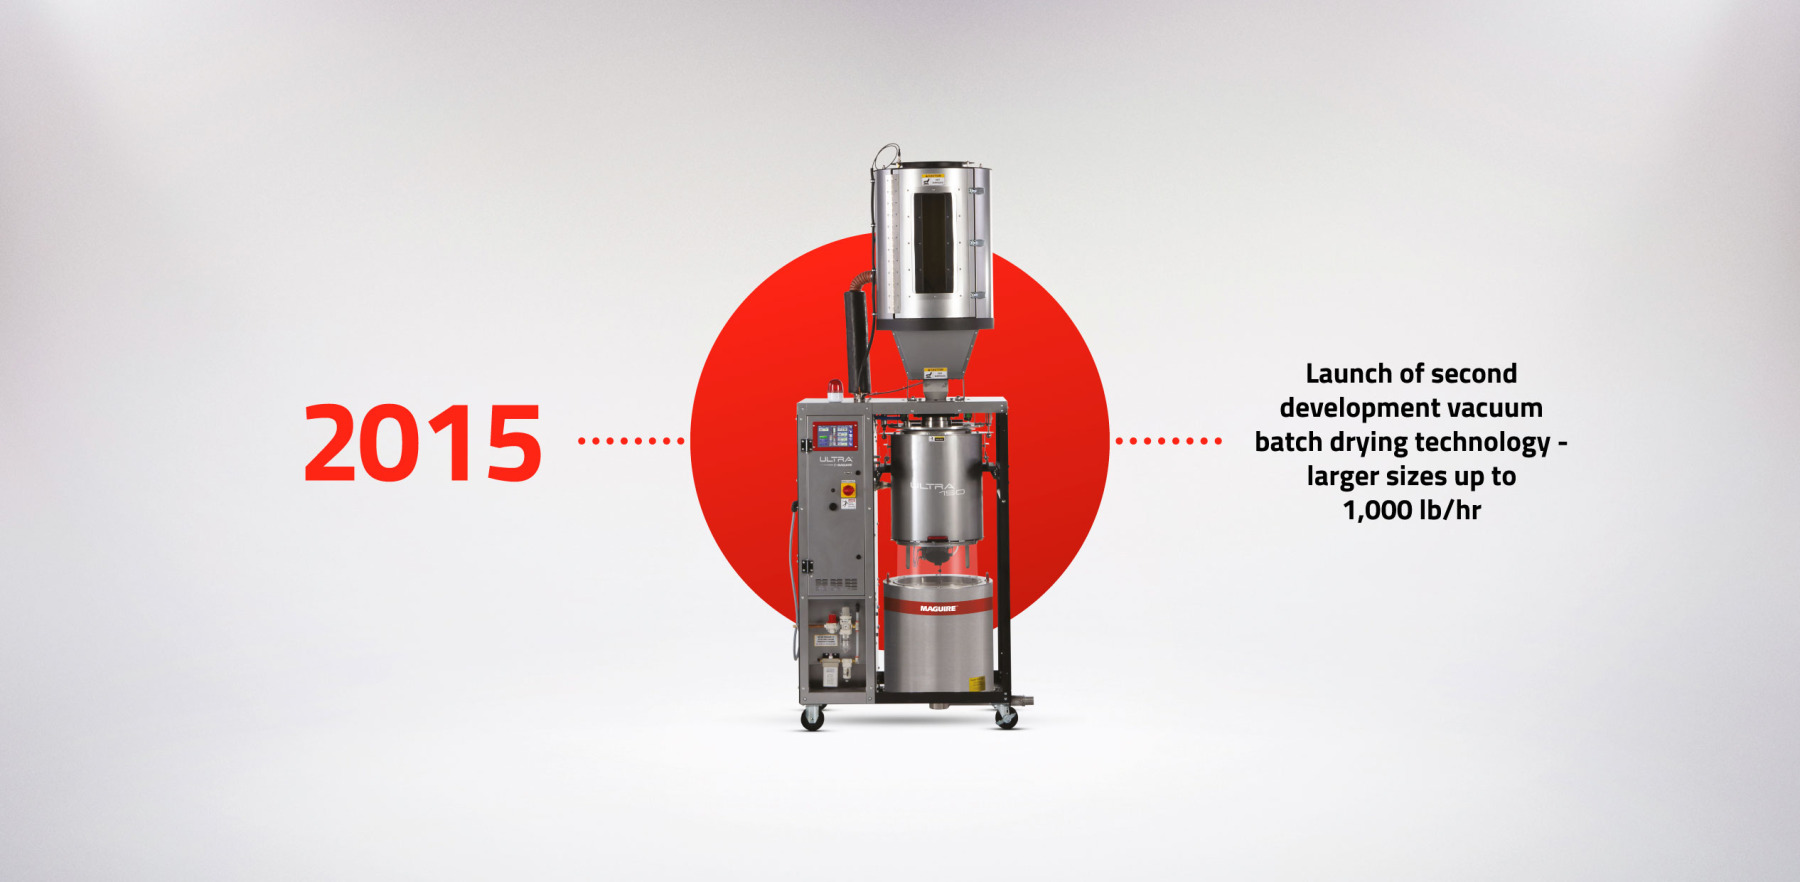 Launch of second development vacuum batch drying technology - larger sizes up to 1,000 lb/hr